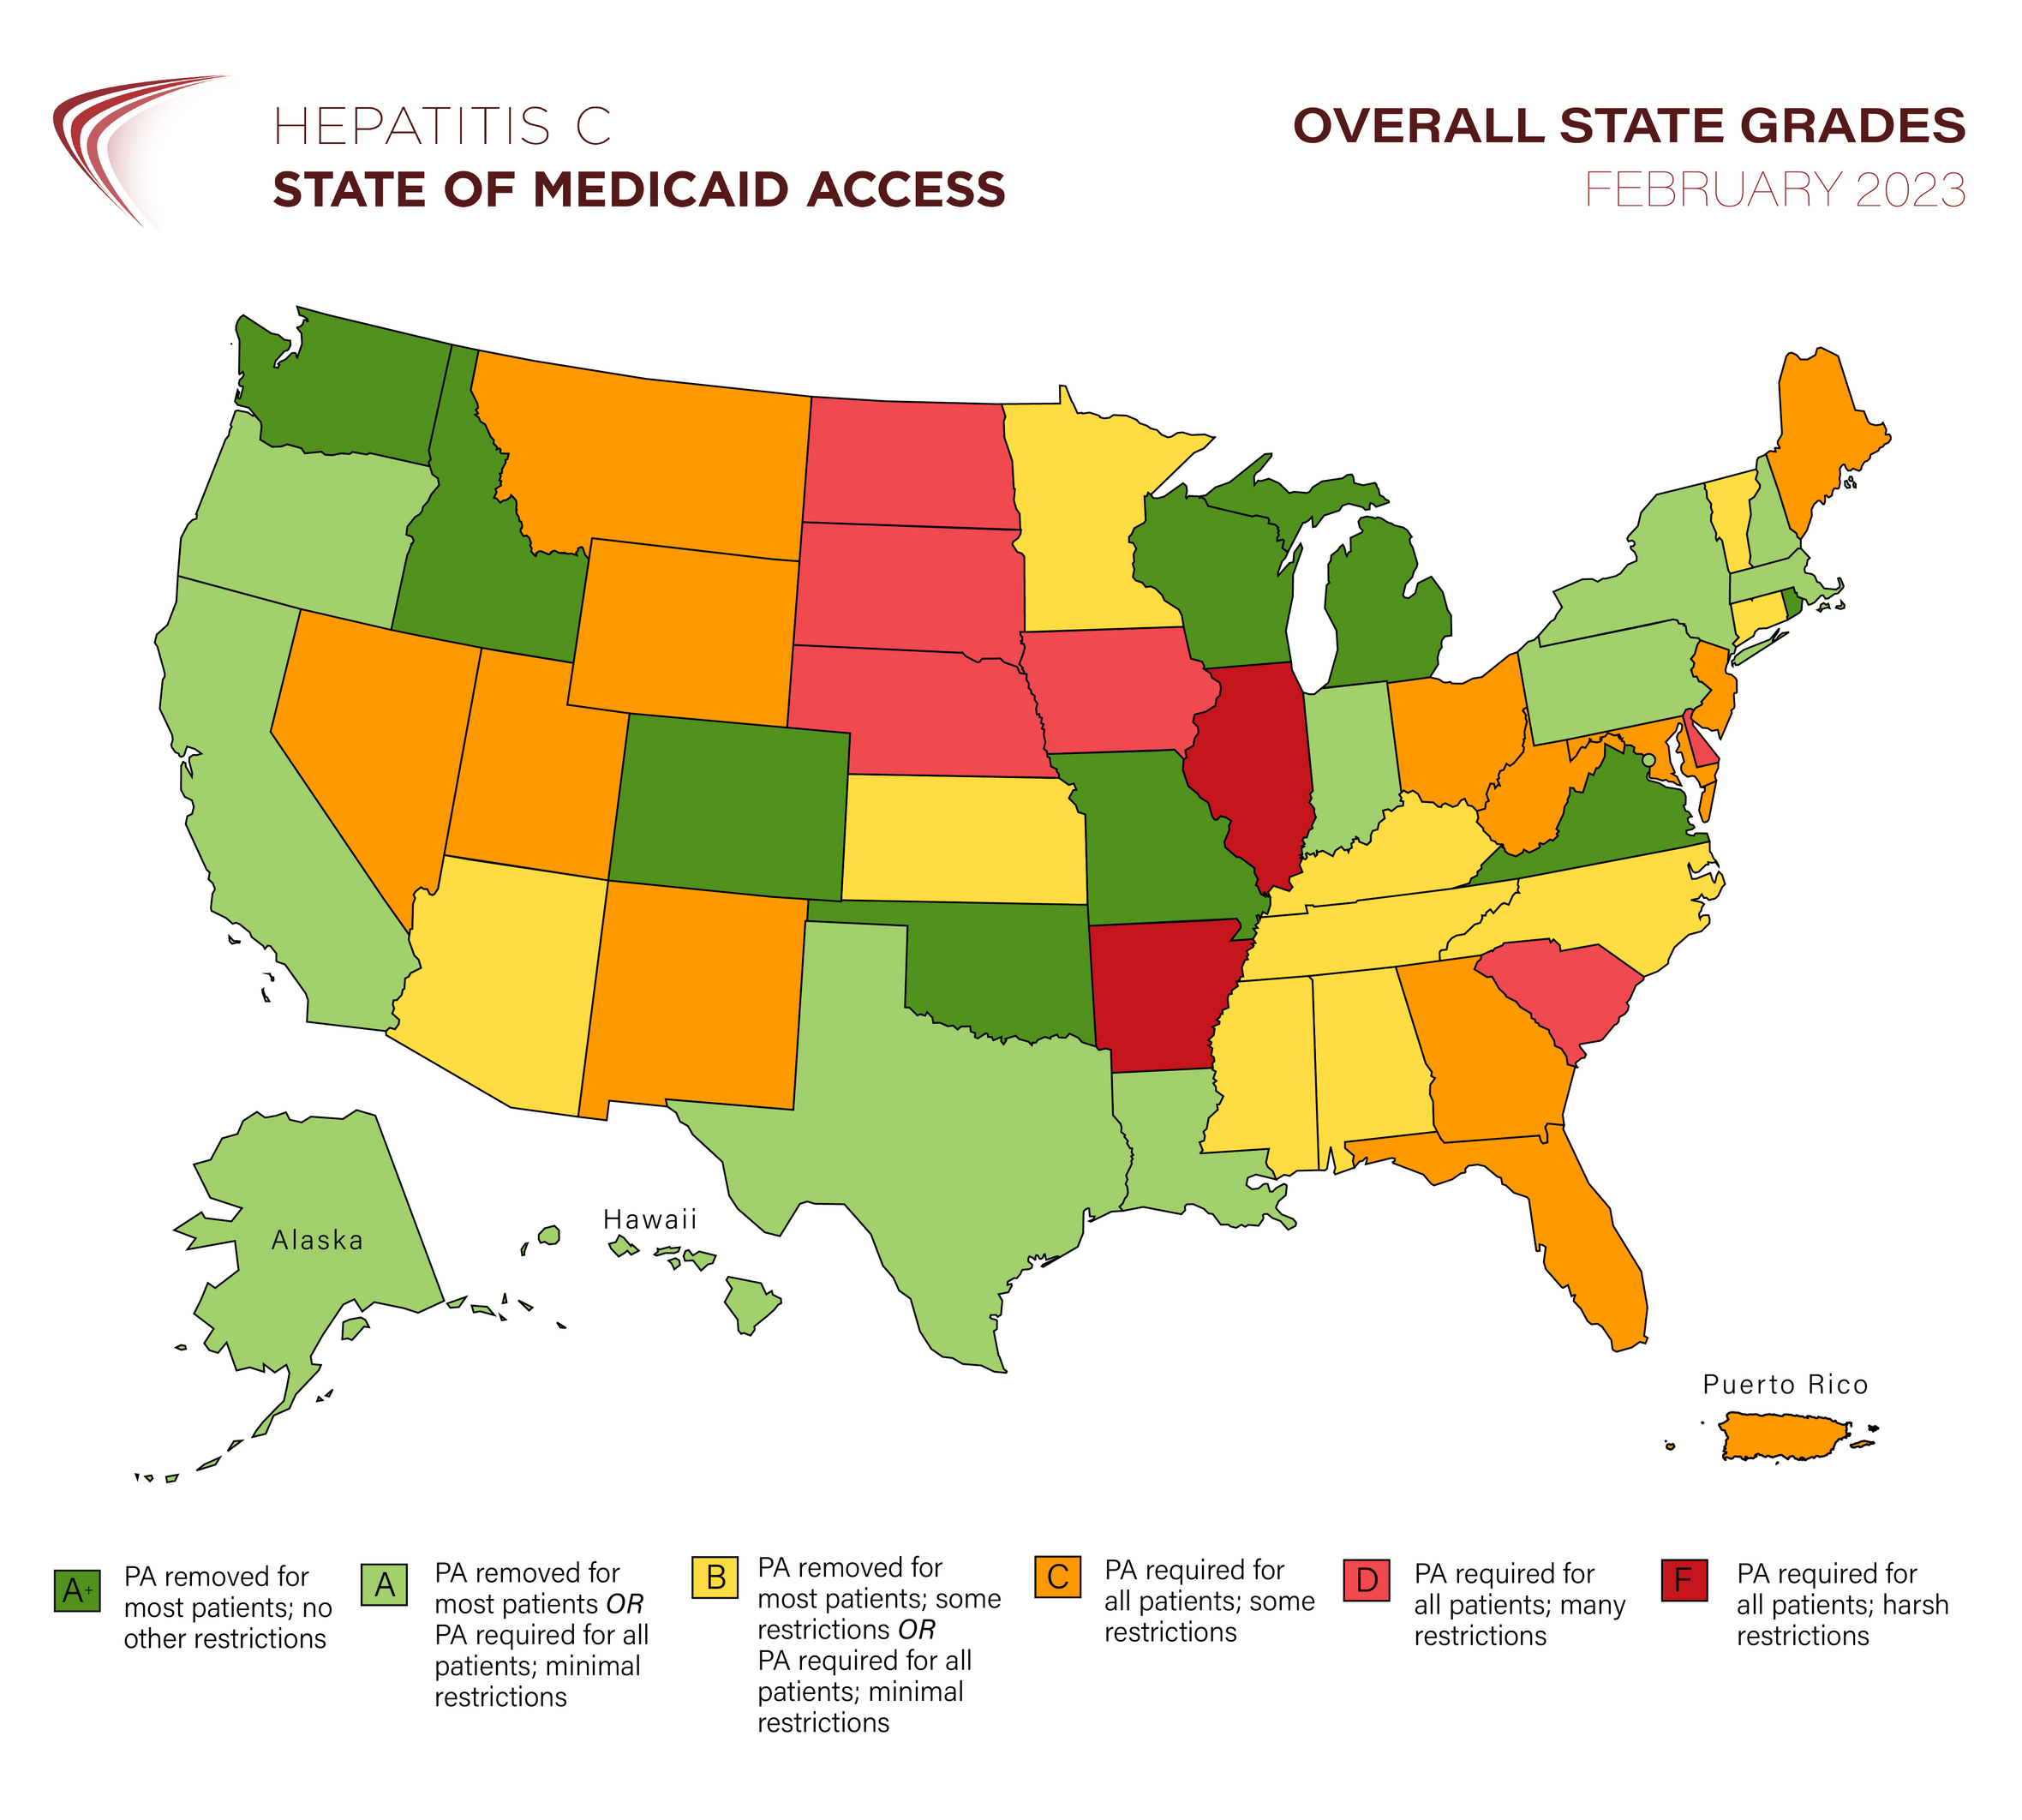 NVHR: Hepatitis C State of Medicaid Access 2023 National Snapshot Report 